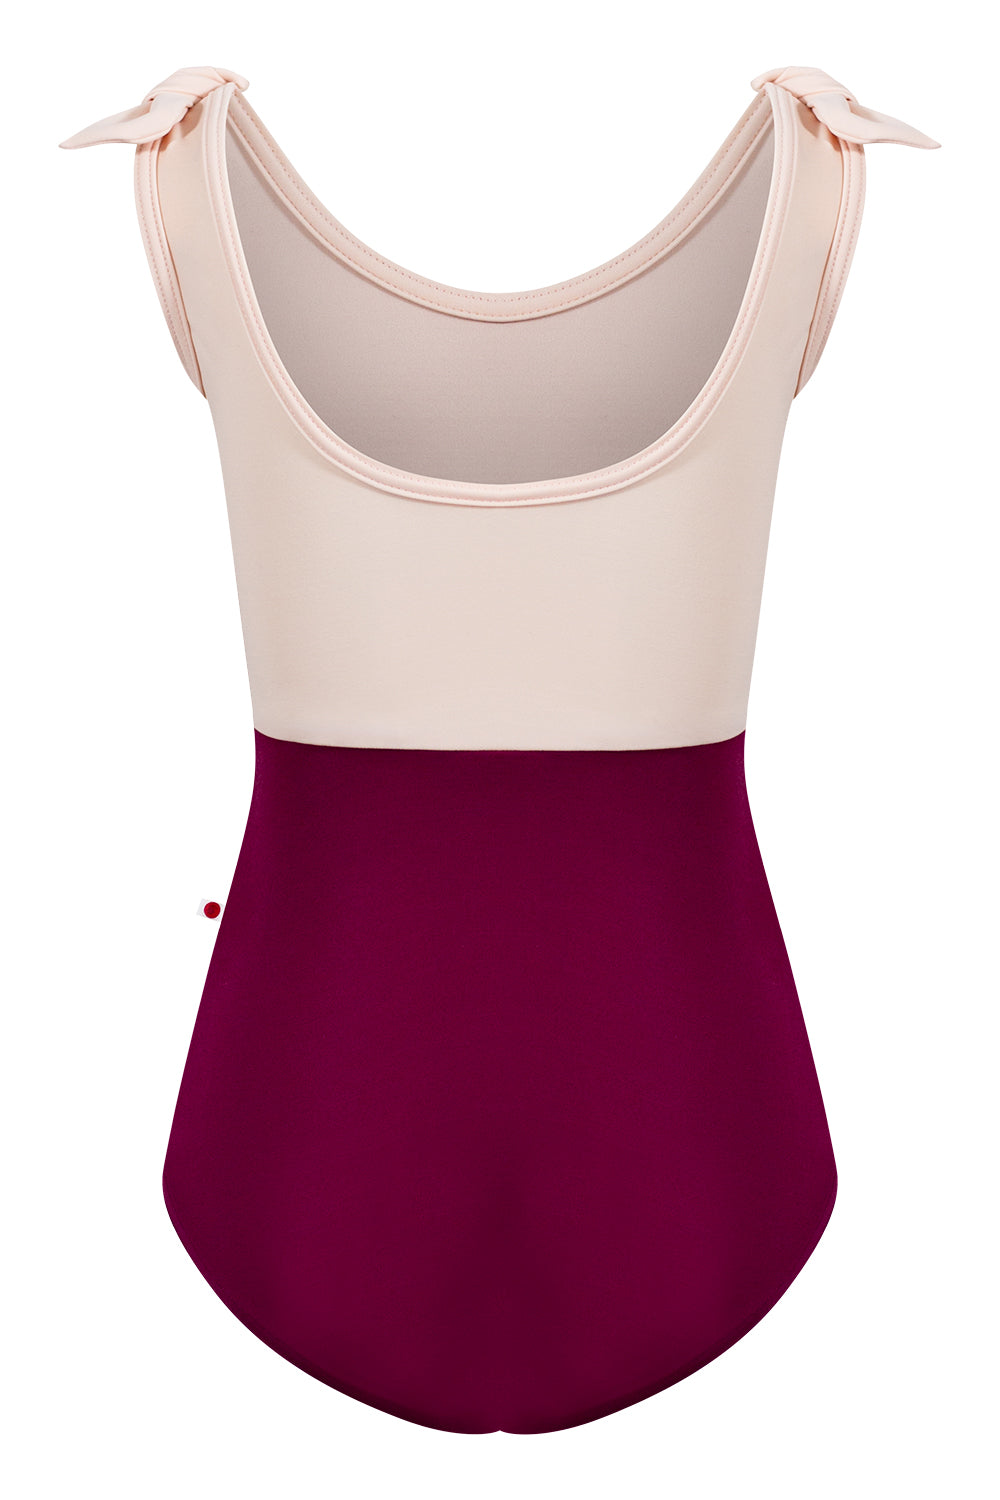 Kids Anna Duo leotard in T-Maroon body color with T-Misty Rose top & trim color and matching shoulder bows